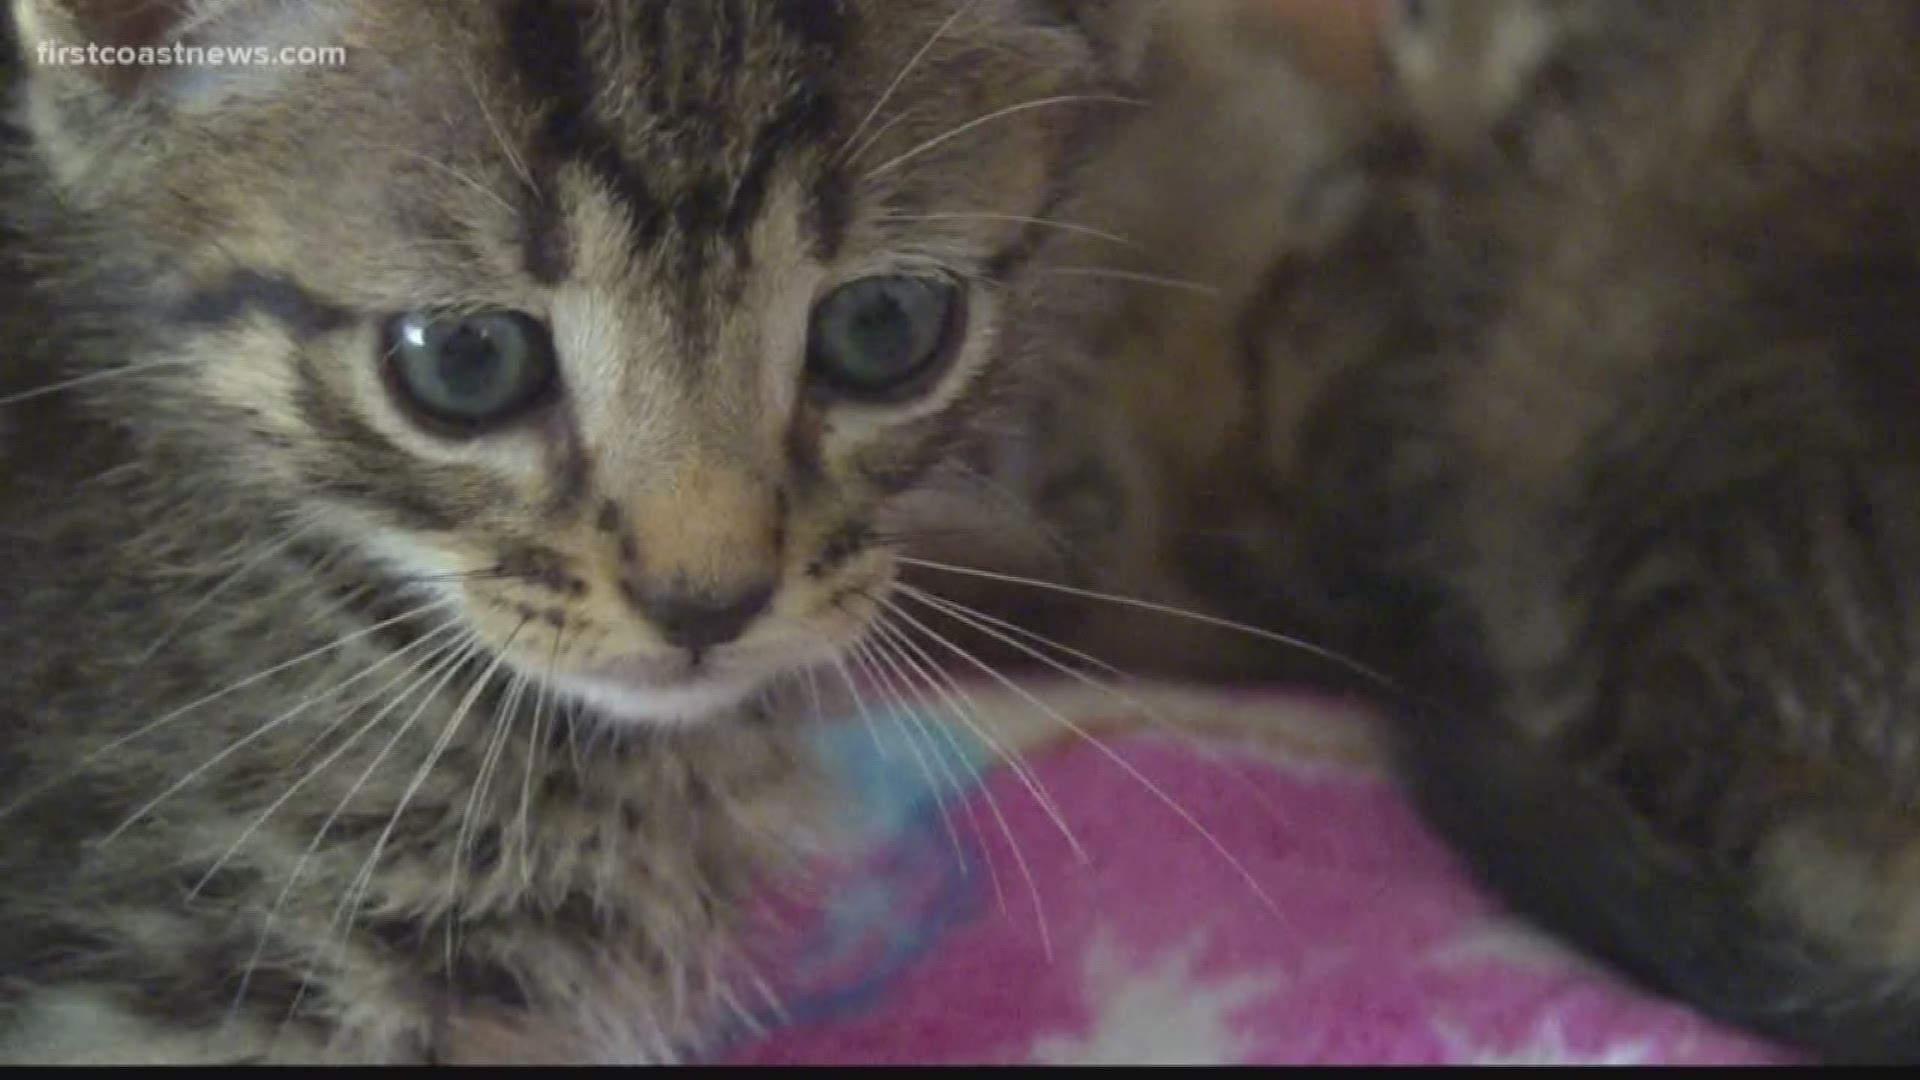 Over a dozen kittens, just weeks old, are recovering at a local shelter after they were left behind Tuesday night in a plastic bin in Putnam County.